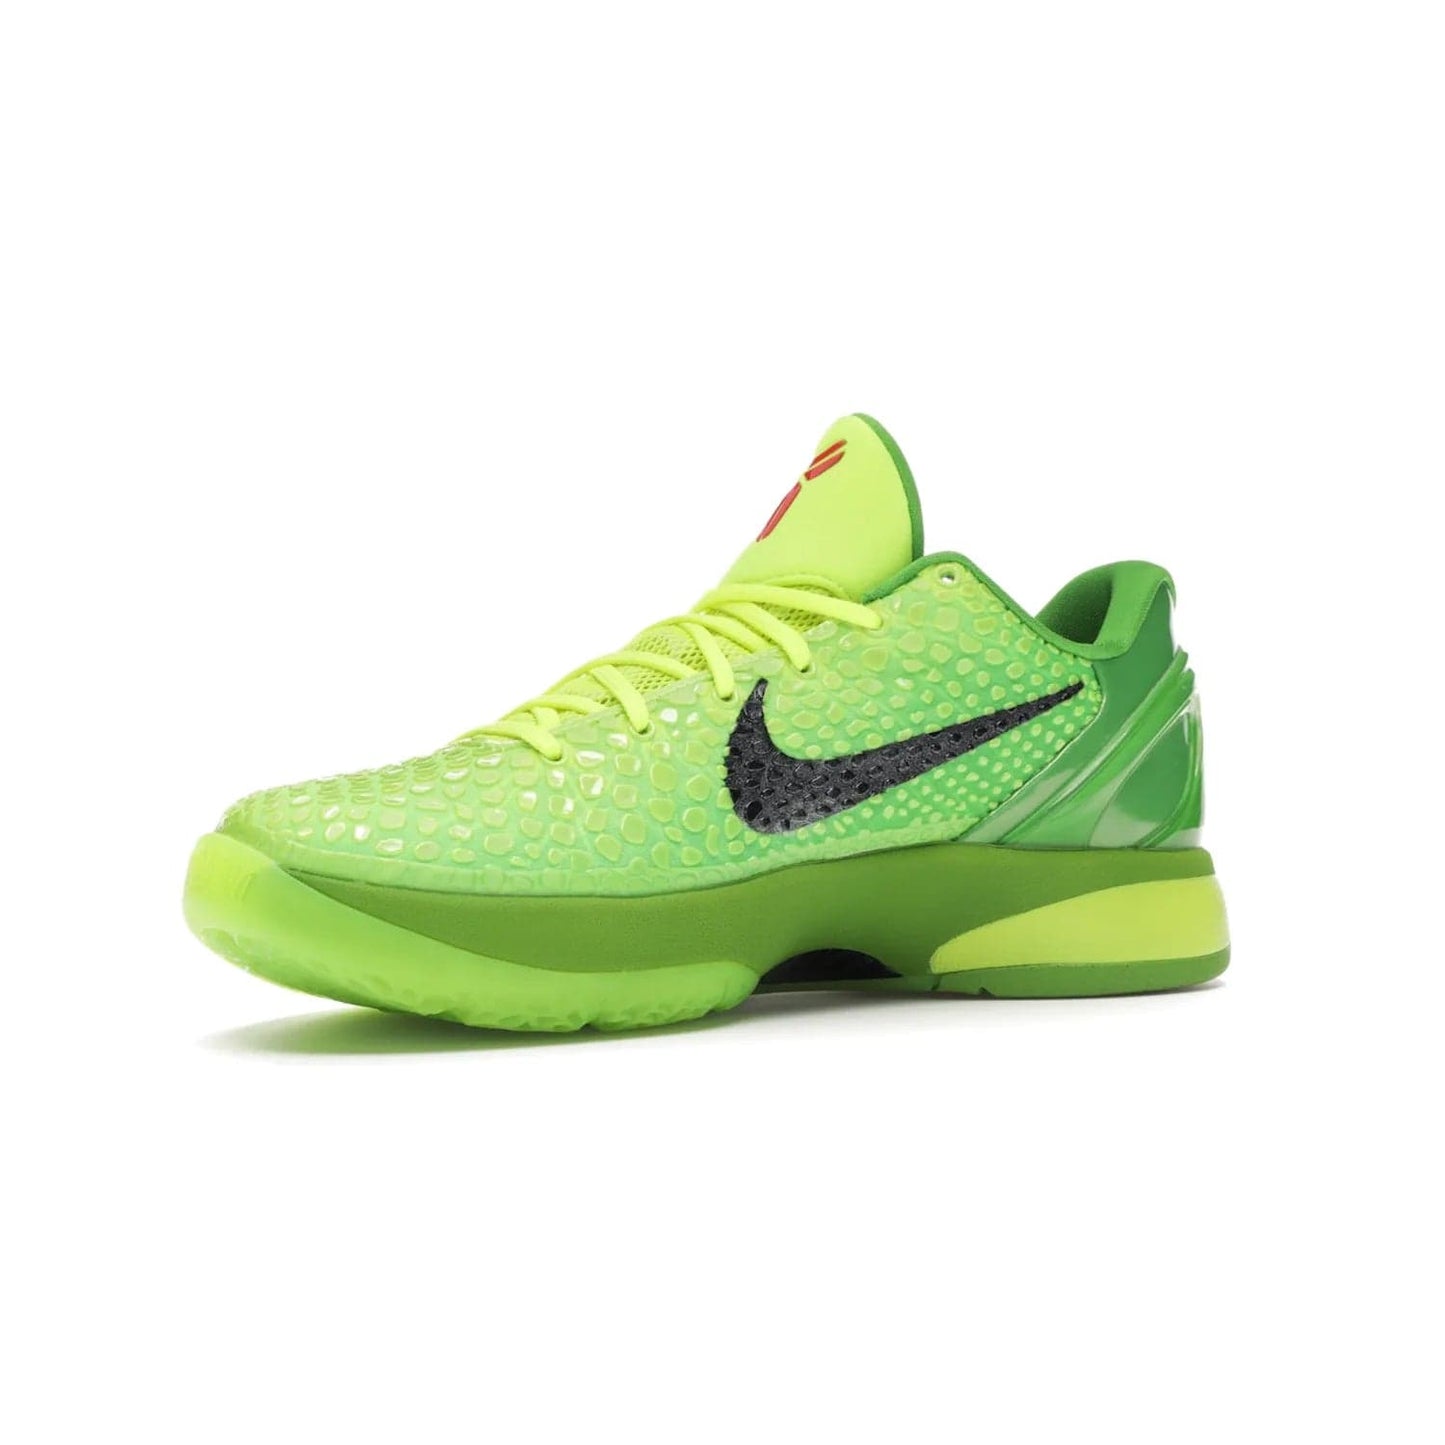 Nike Kobe 6 Protro Grinch (2020) - Image 16 - Only at www.BallersClubKickz.com - #
The Nike Kobe 6 Protro Grinch updates the iconic 2011 design with modern tech like a Zoom Air cushioning system, scaled-down traction, and updated silhouette. Experience the textured Green Apple and Volt upper plus bright red and green accents for $180.